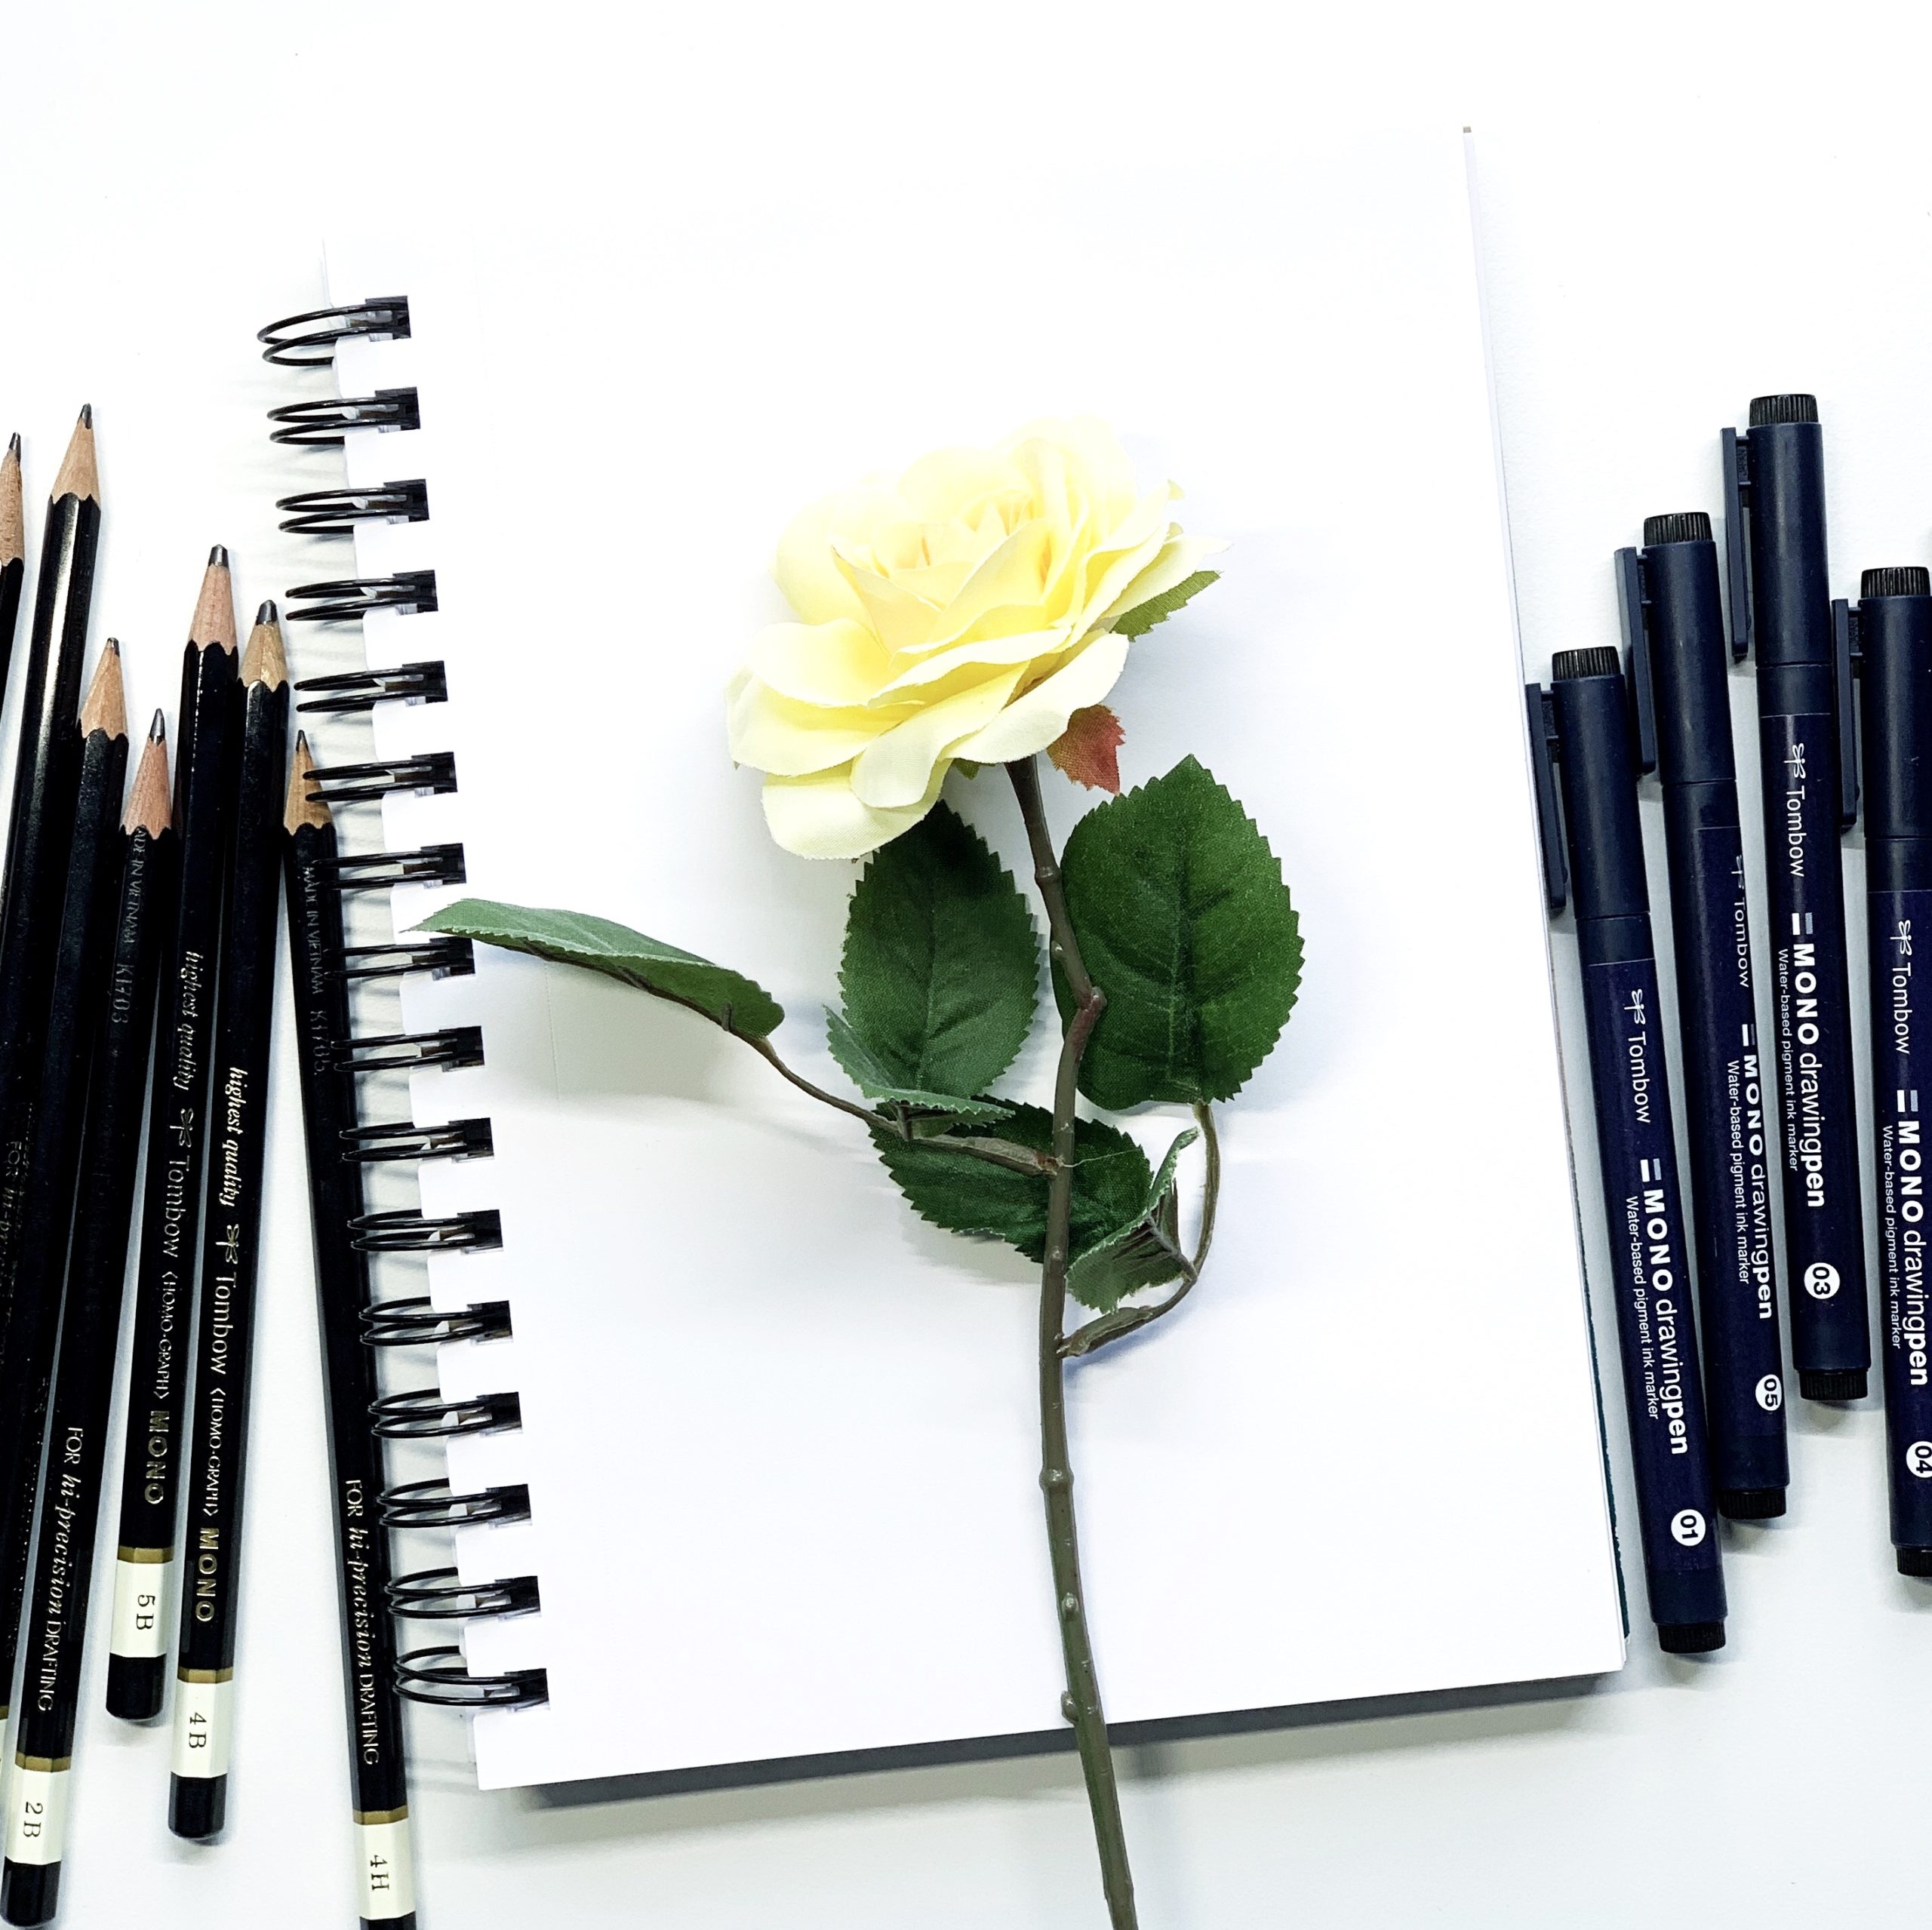 Floral Illustration Tips, Tricks and Tutorial - Tombow USA Blog